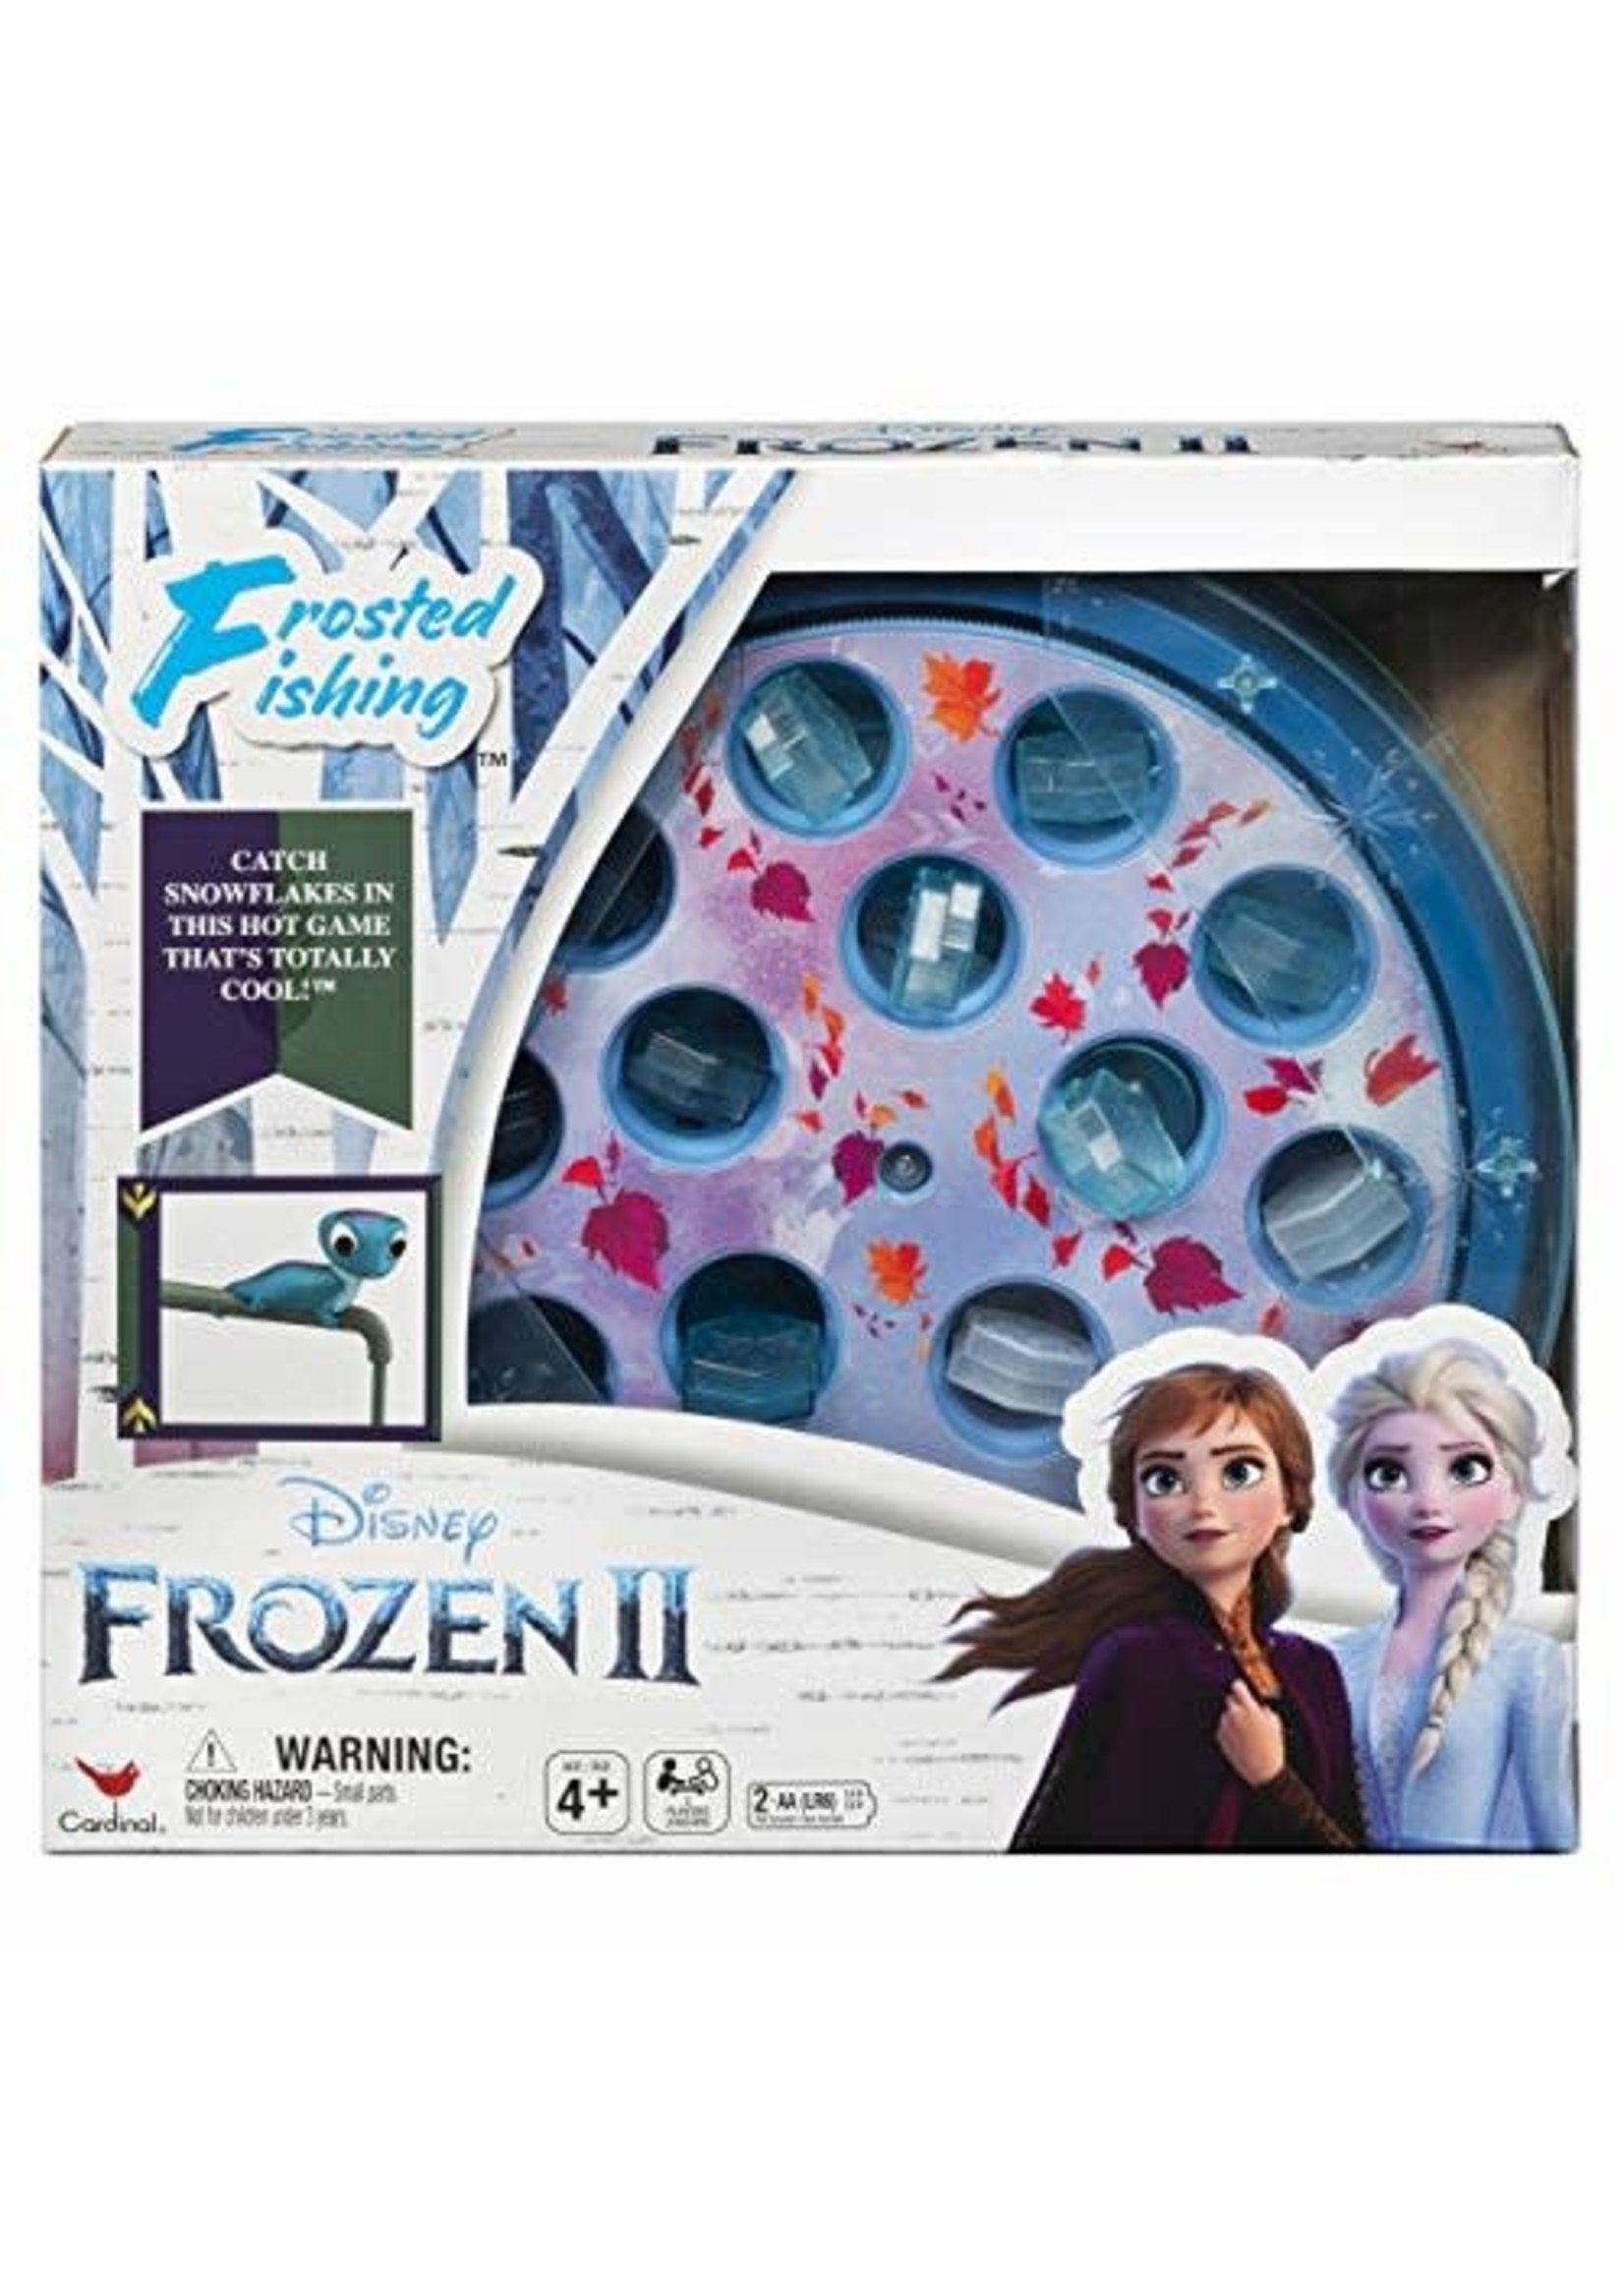 Disney Frozen 2 Frosted Fishing Board Game Open Box - D3 Surplus Outlet